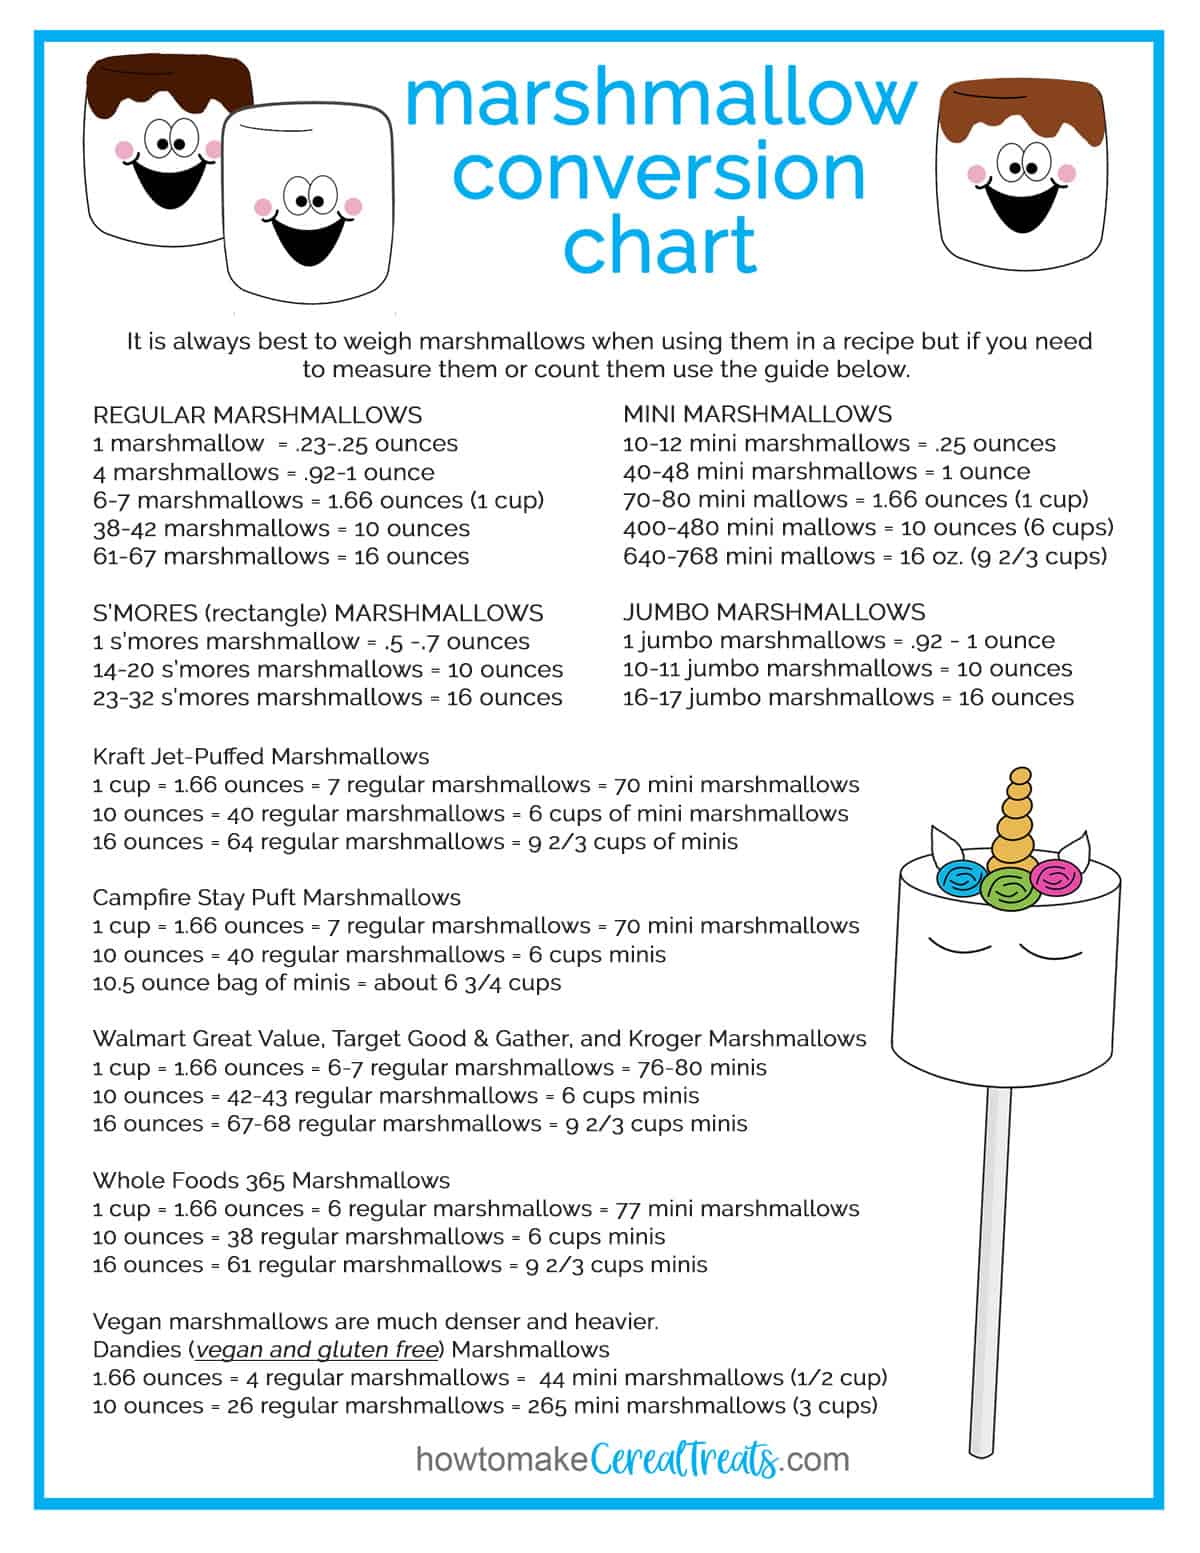 Marshmallow conversion chart featuring marshmallows in a cup and in a 10-ounce or 16-ounce bag.